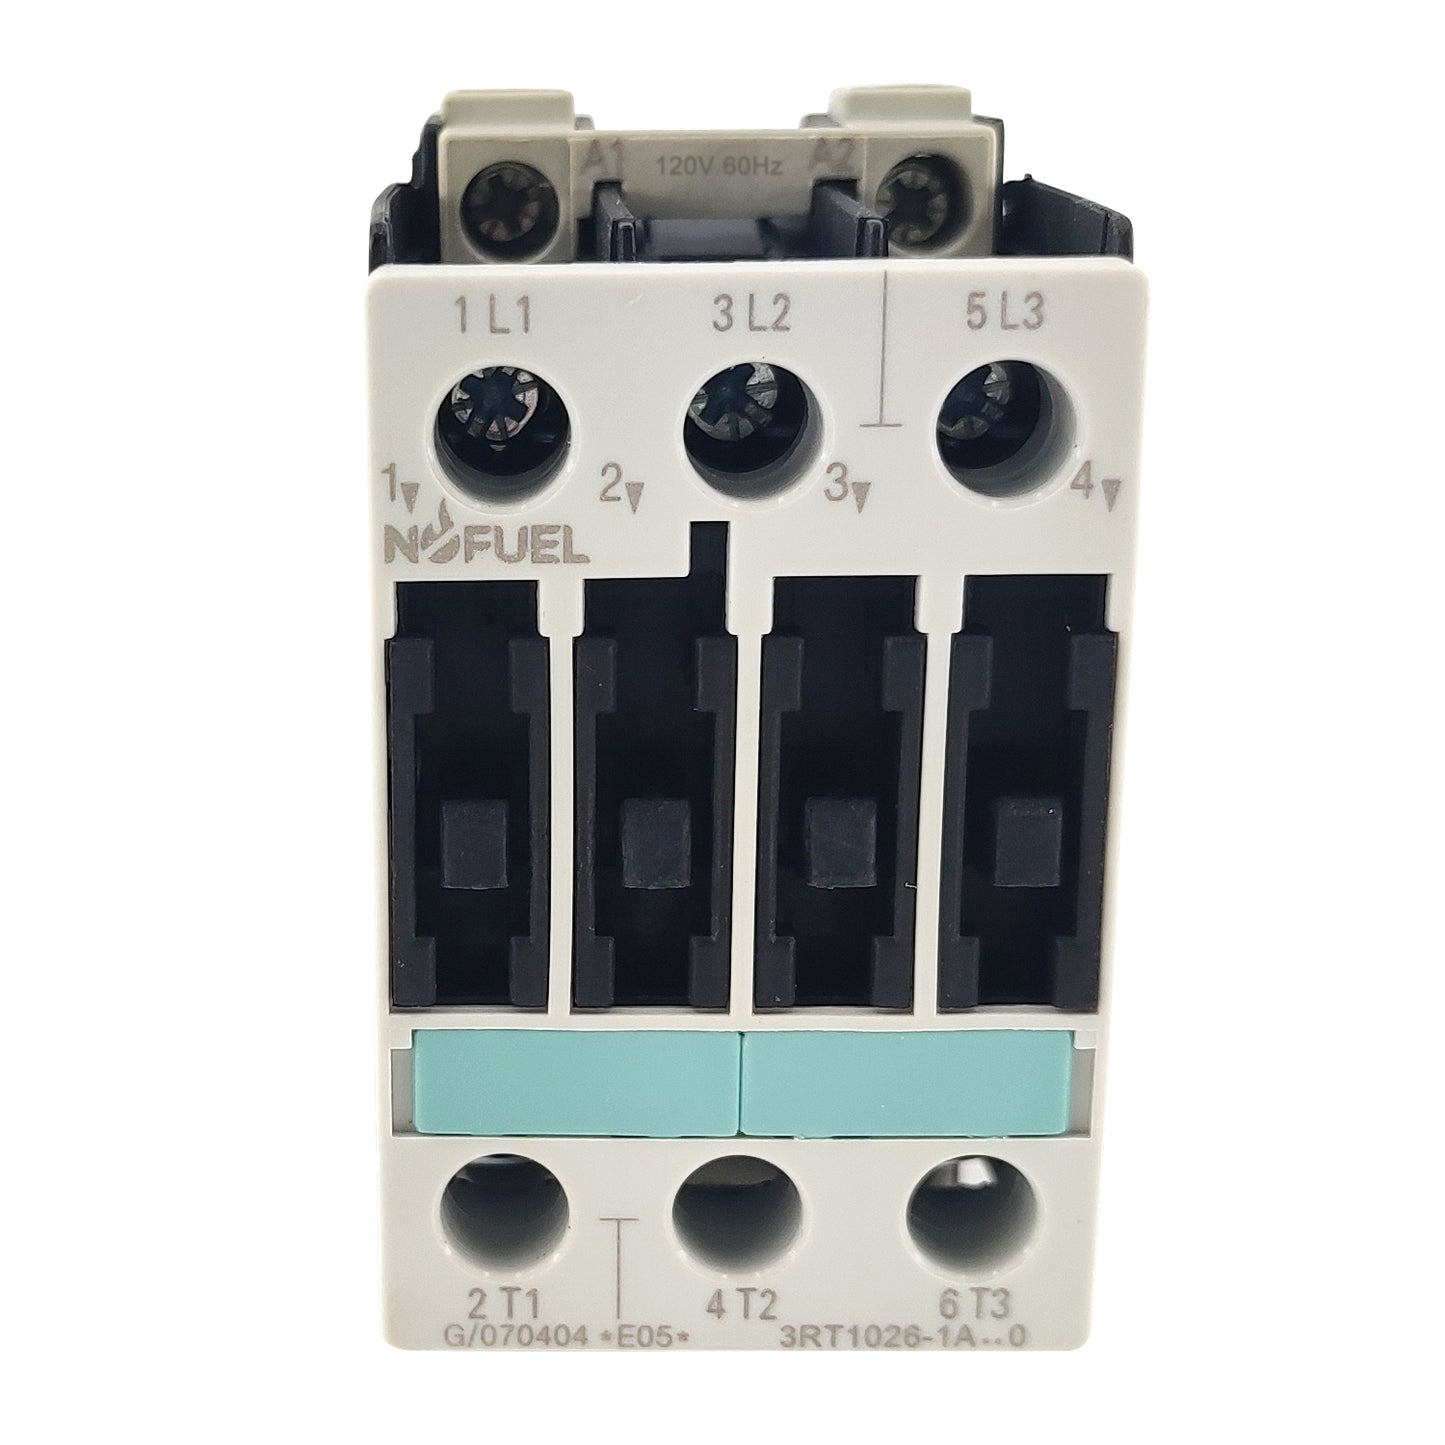 3RT1026-1AK60 AC Contactor 120V Fit for Siemens 3RT1026